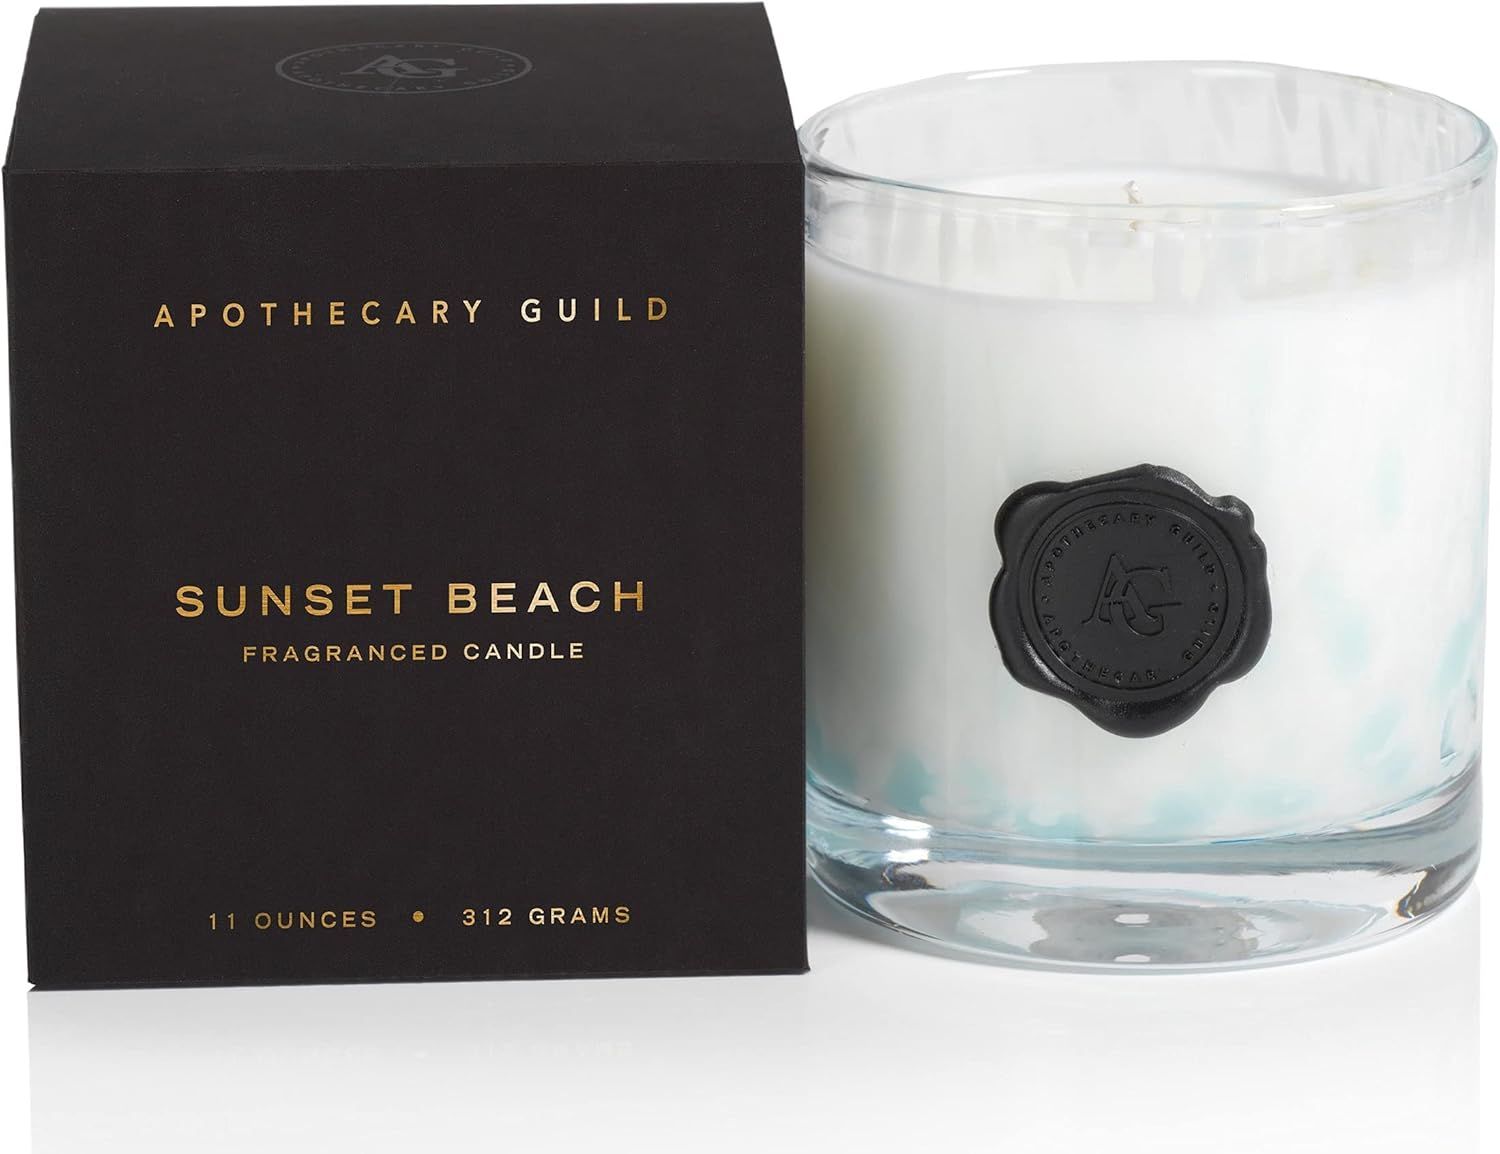 Zodax-Apothecary Guild Opal Glass Candle Jar in Gift Box (Sunset Beach) | Amazon (US)